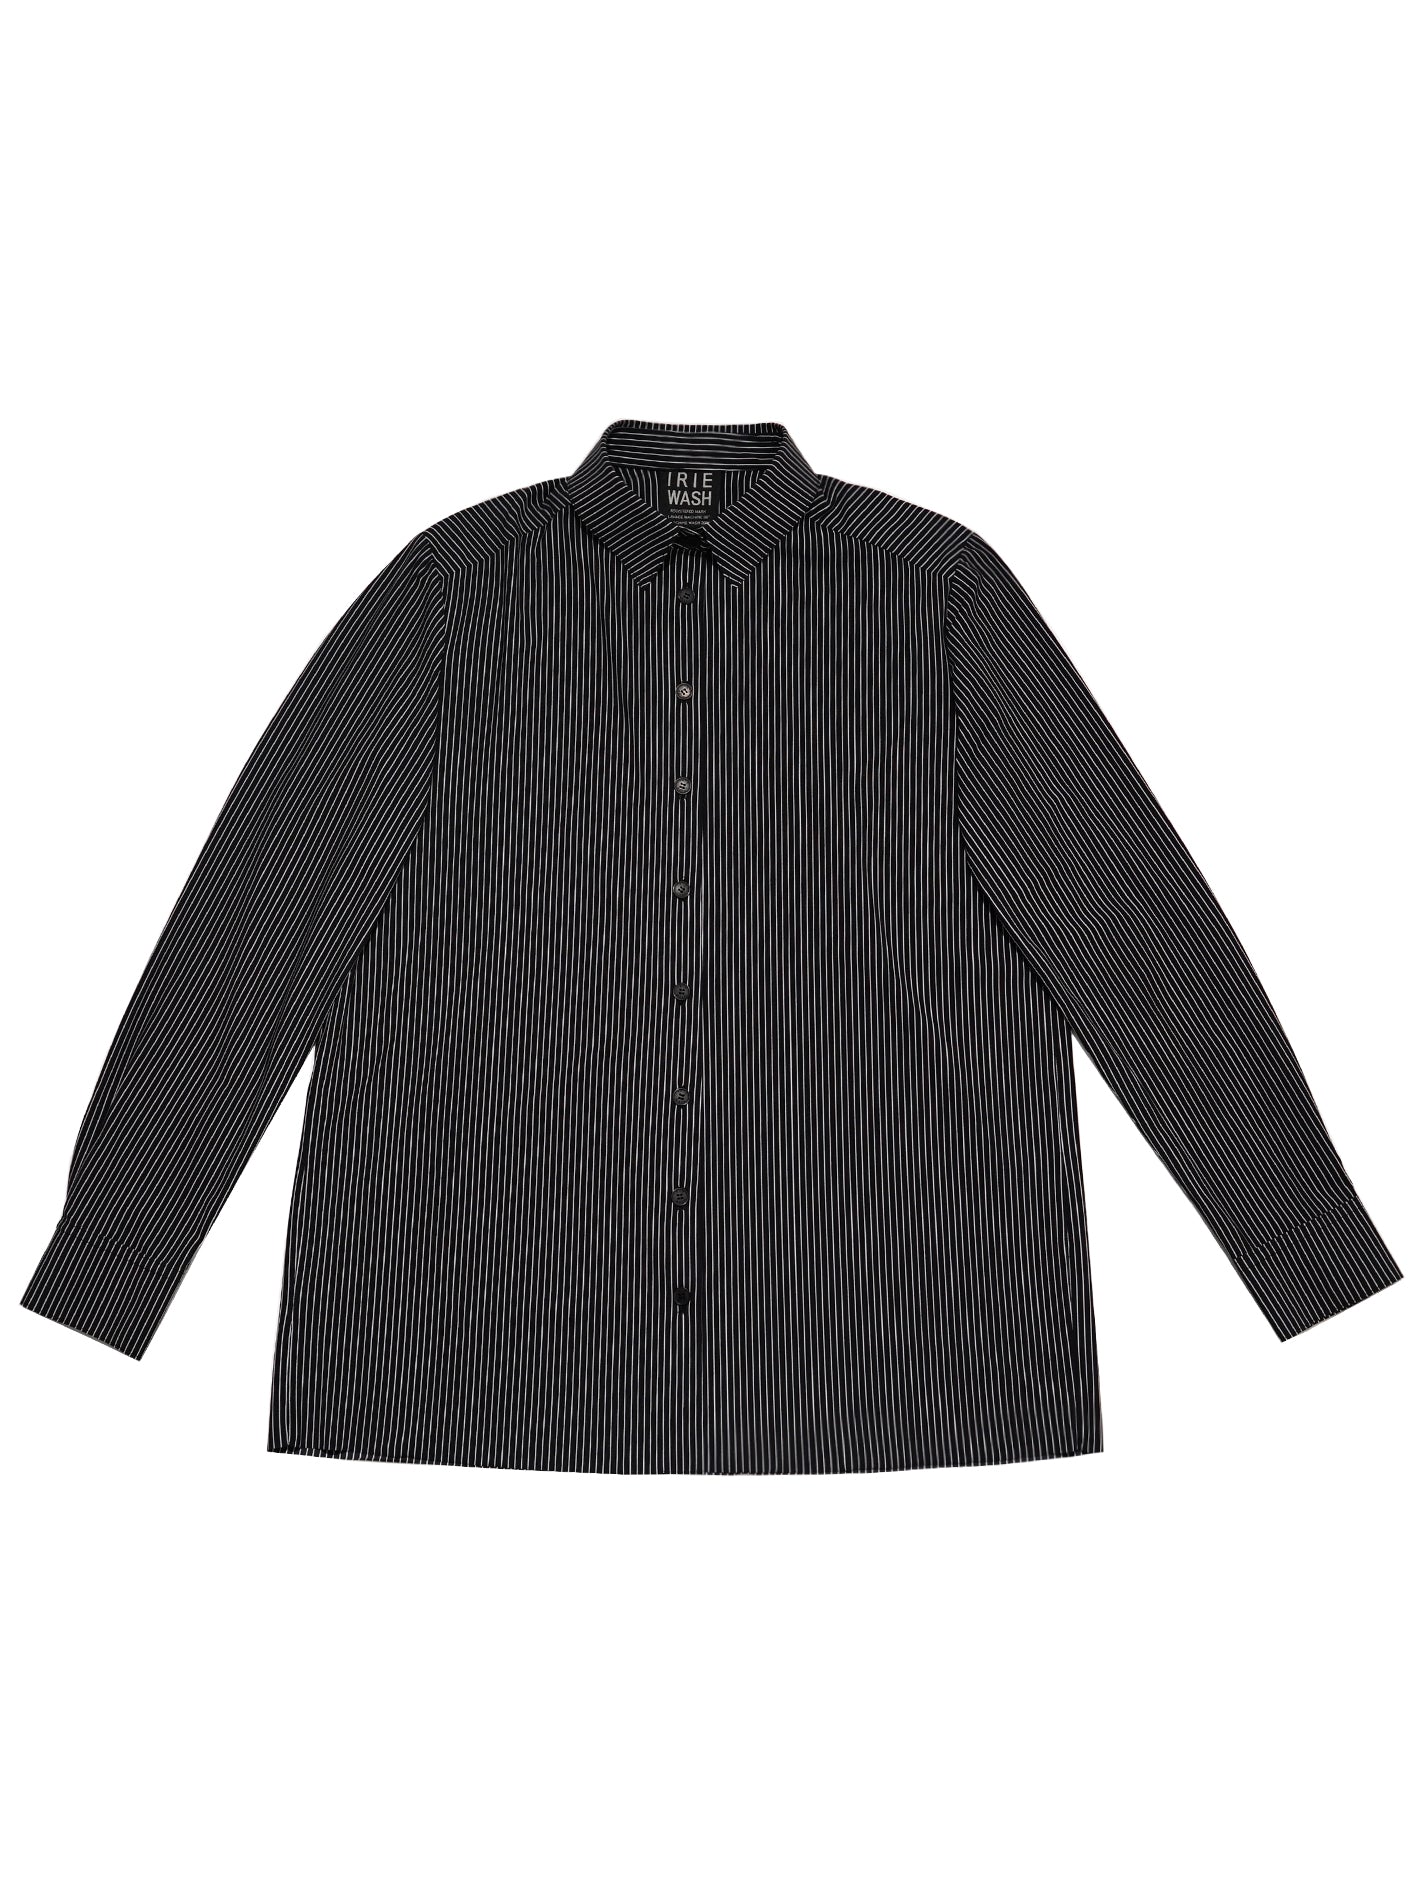 CHEMISE STYLE HOMME, Rayures Fines